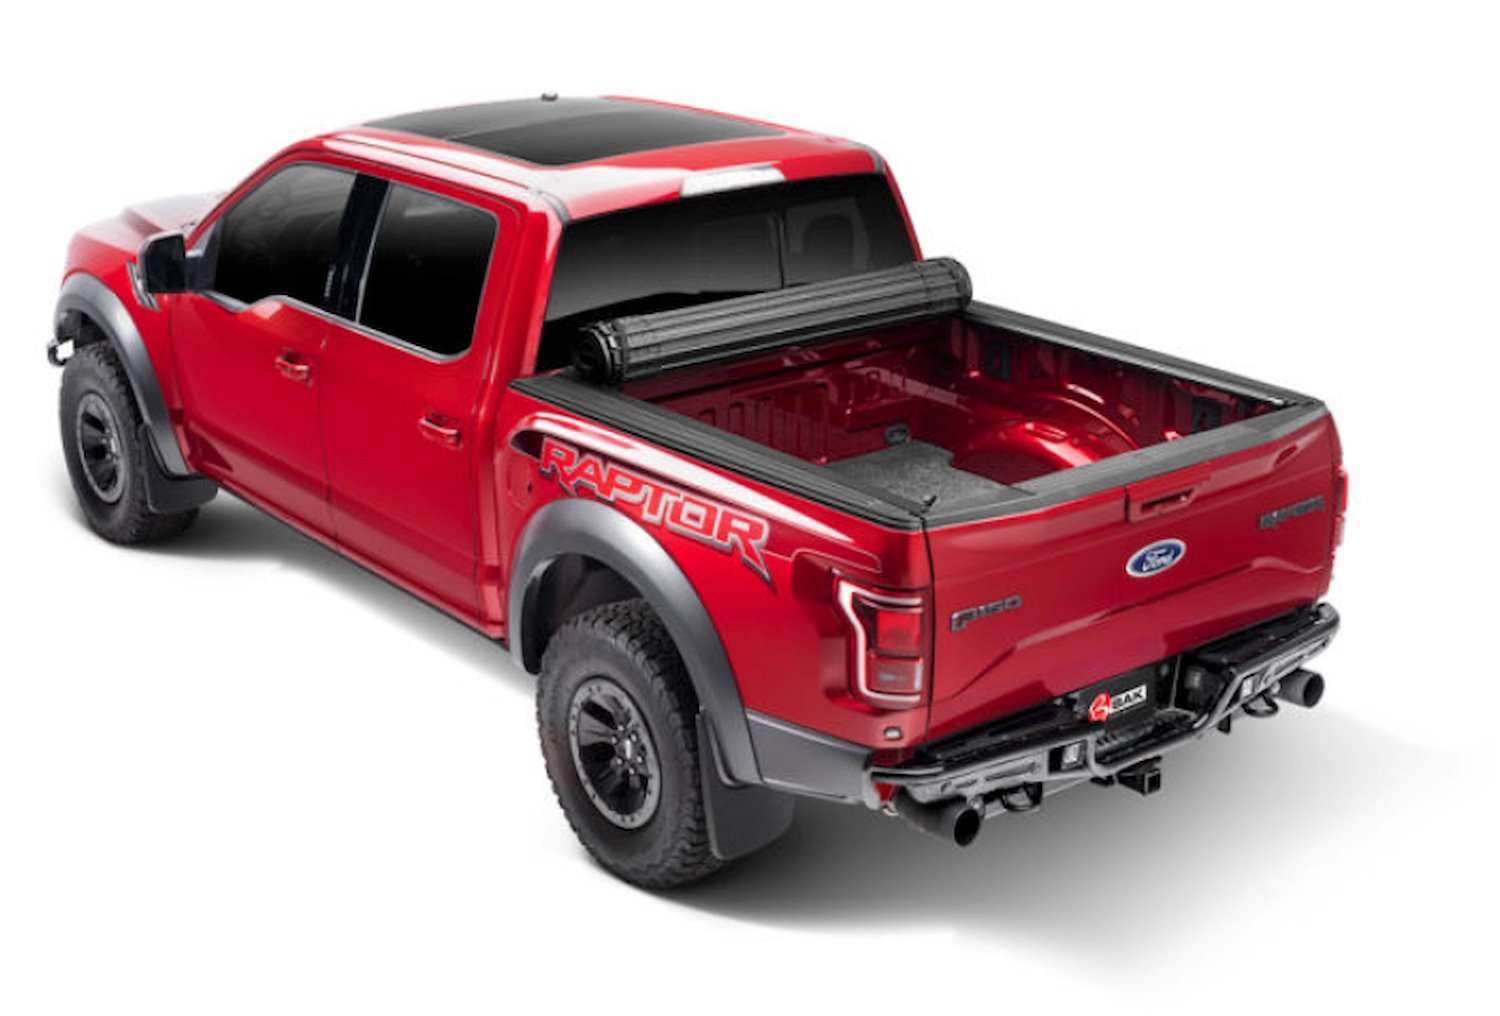 Revolver X4 for 2015-2020 Ford F-150 with 6 ft. 6 in. Bed